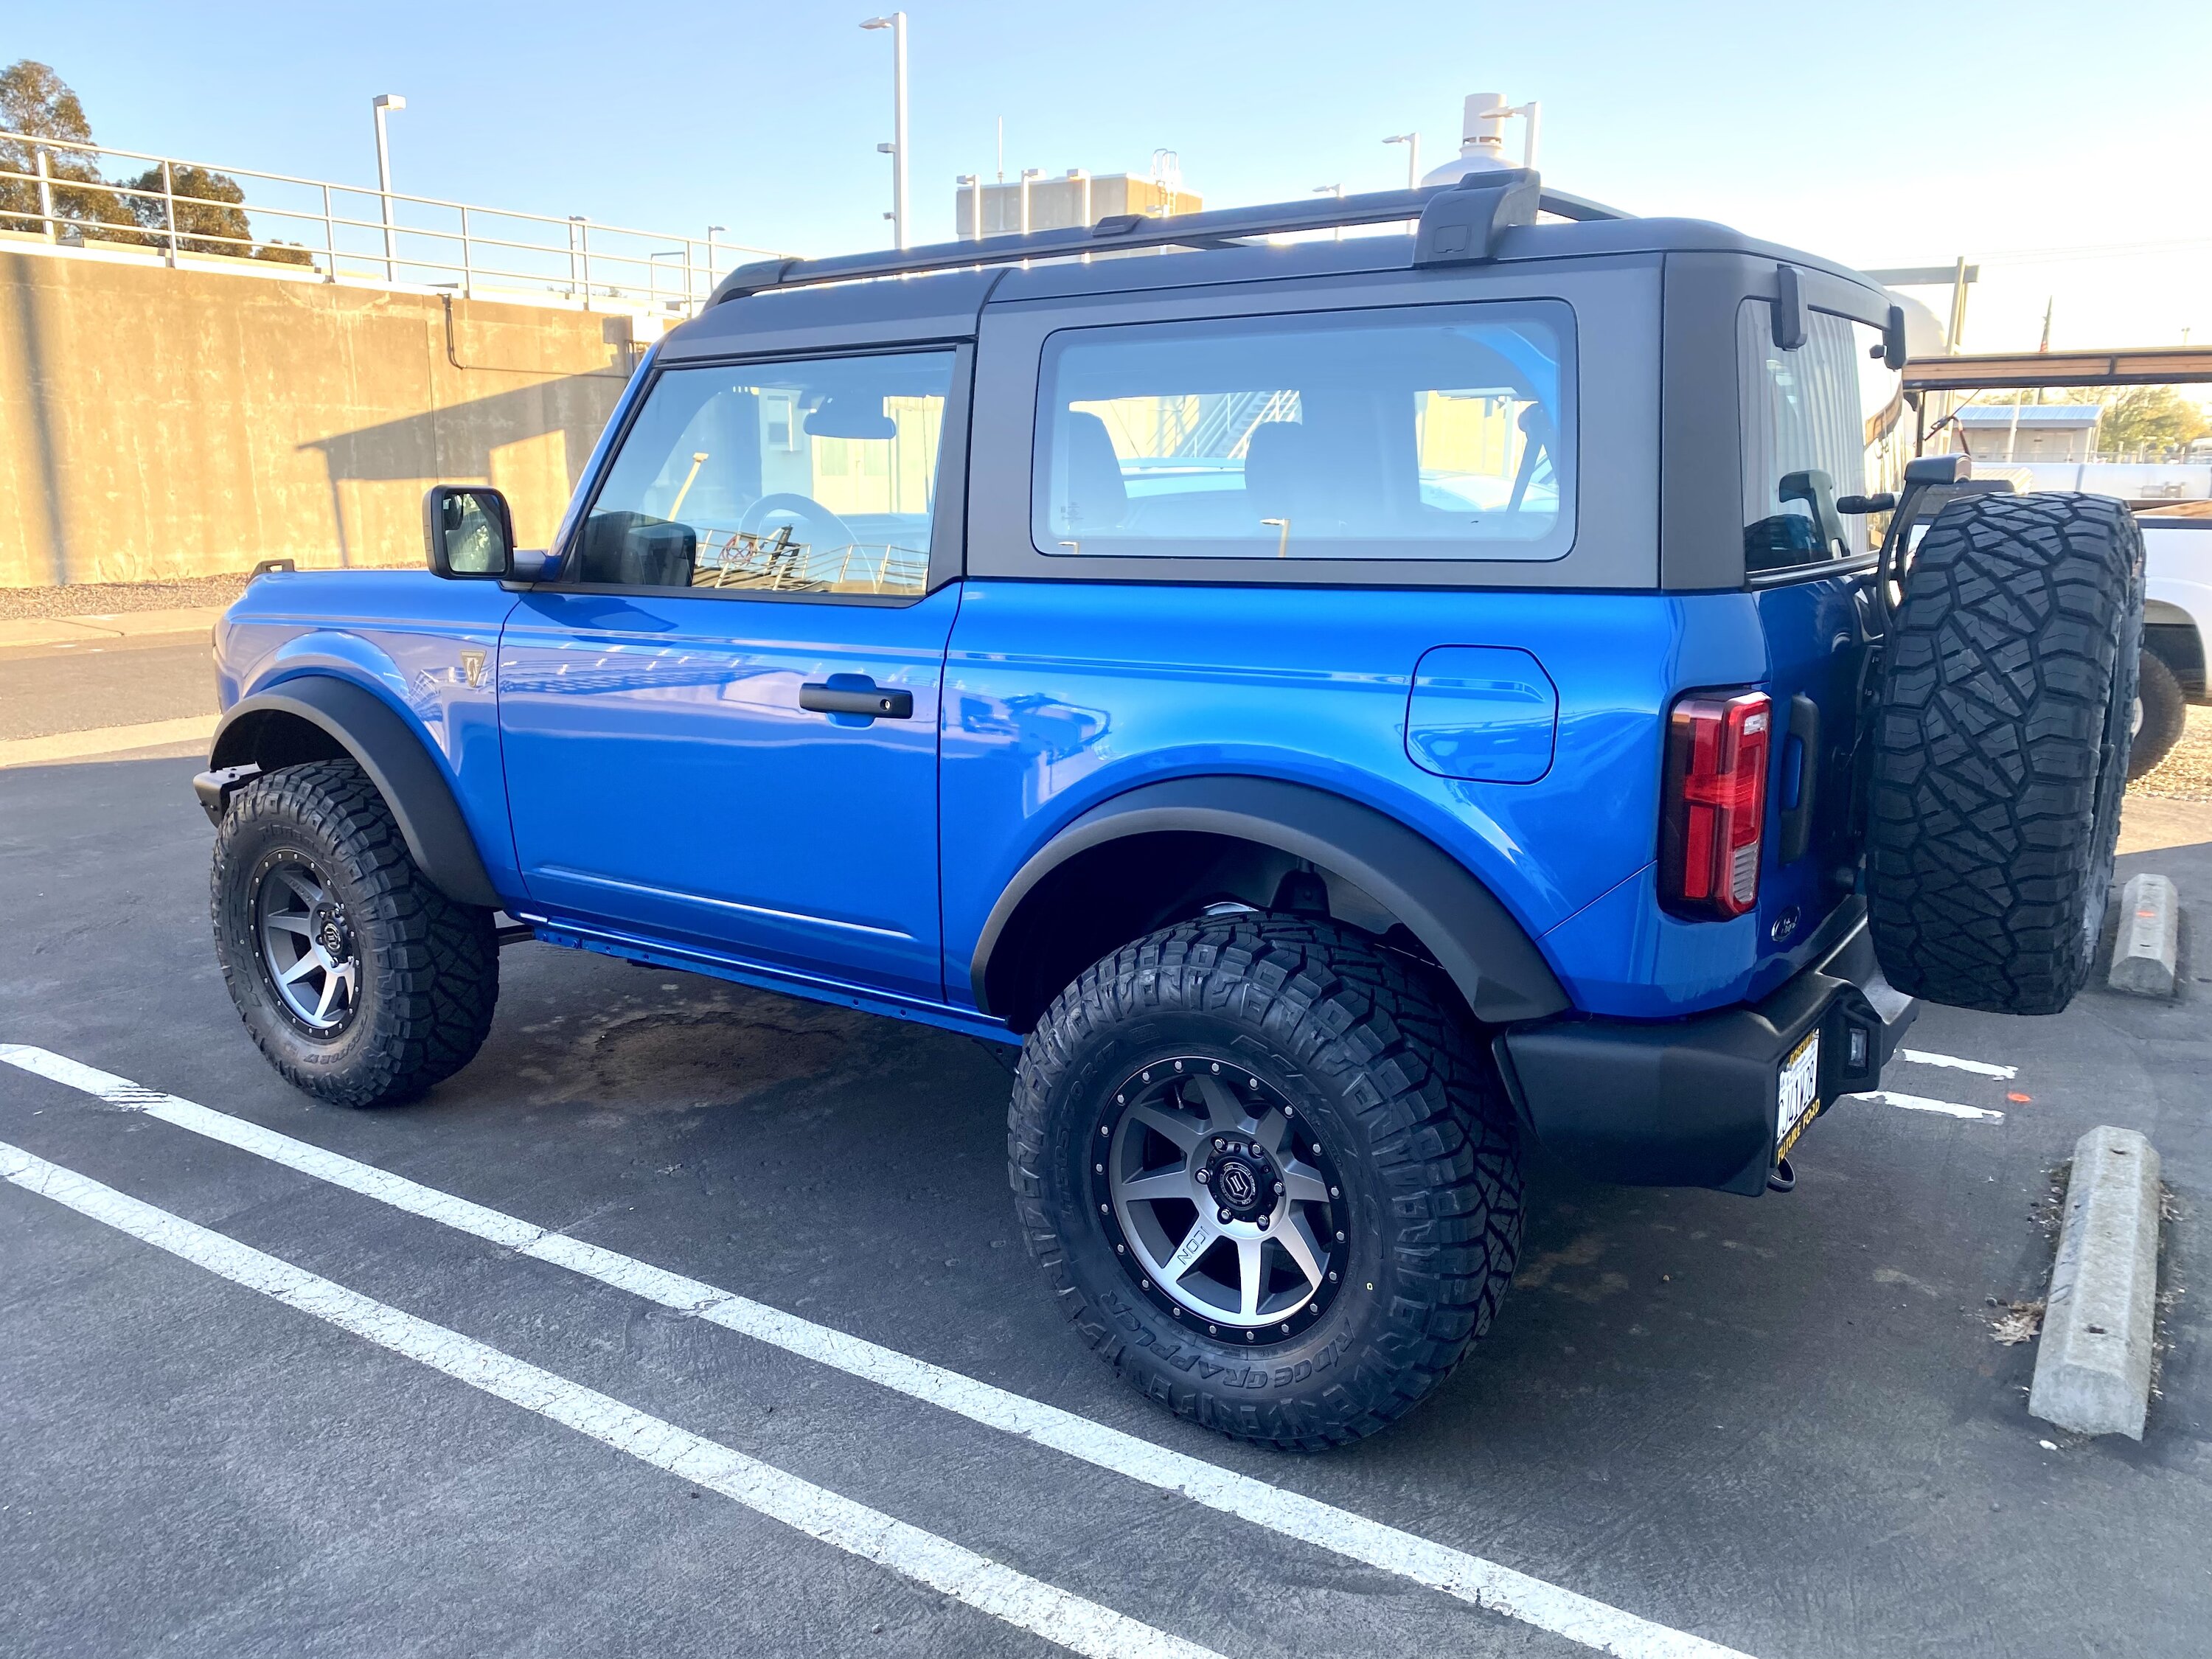 Ford Bronco Base 2 Door Bronco Tint Thread - Post Yours B4D5D522-0881-49BE-9F2A-FC1E55F832D8